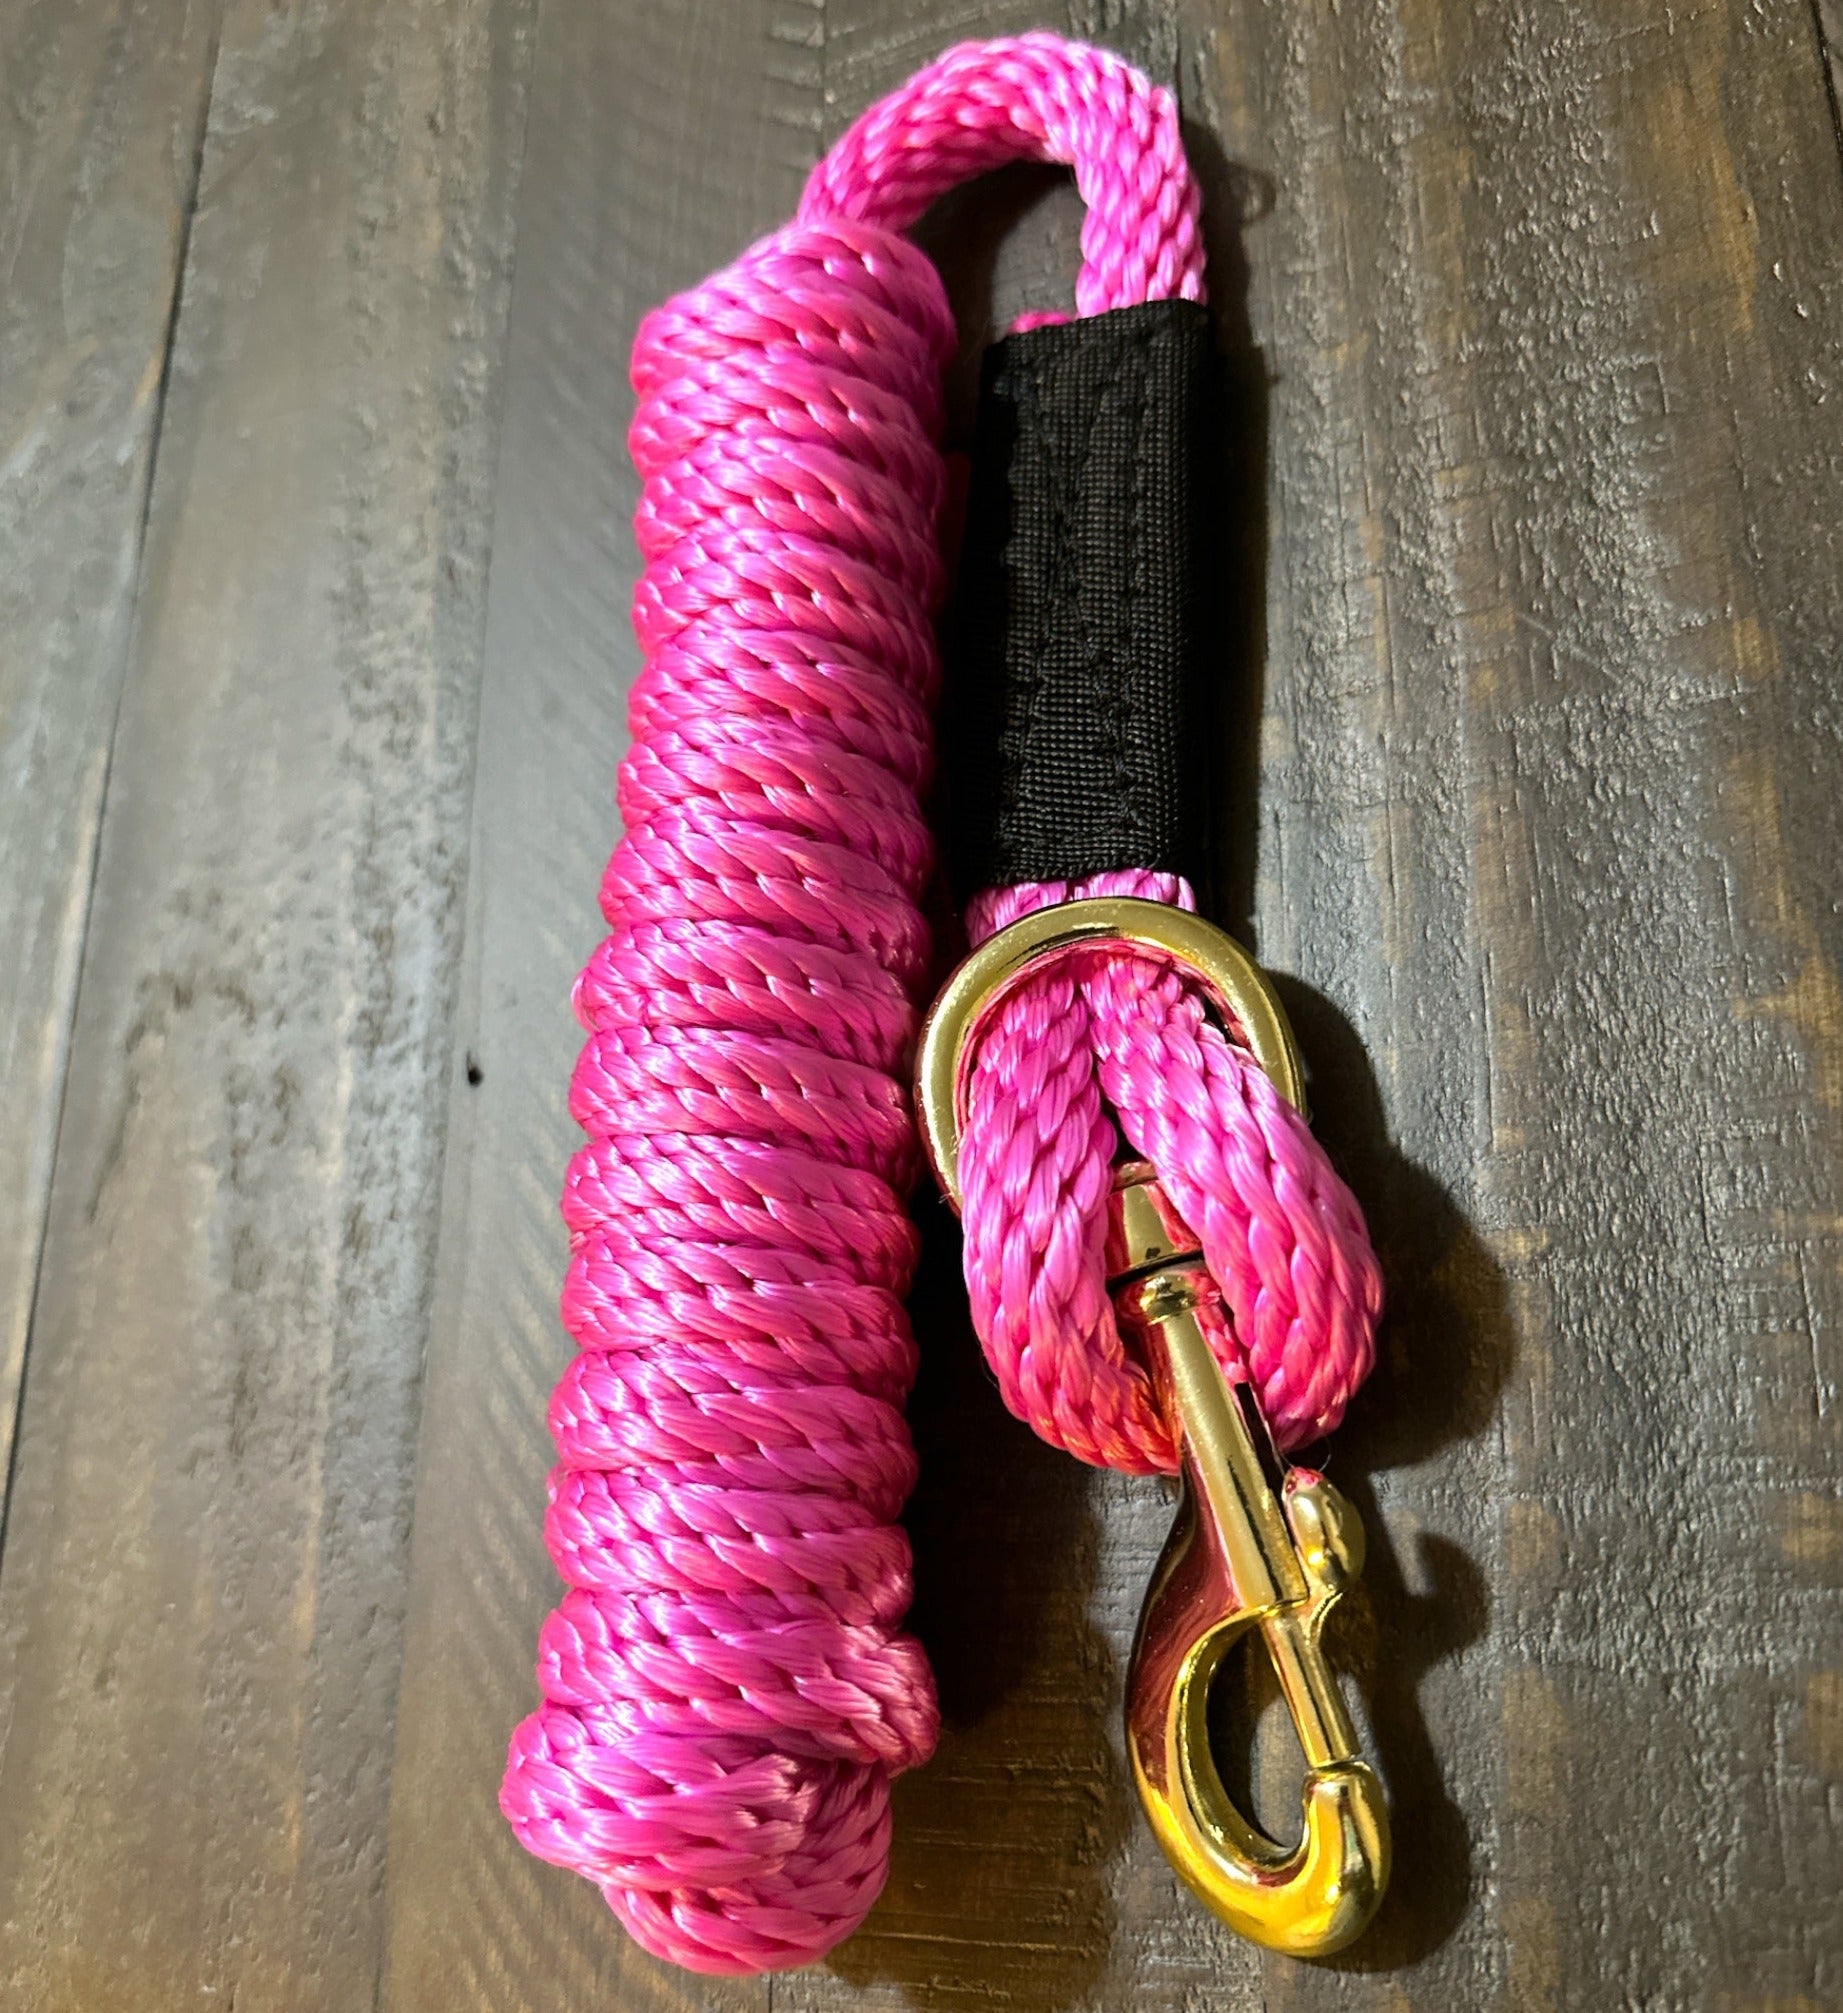 Quick Clip Rope Halter - Average Horse – Spotted M Tack